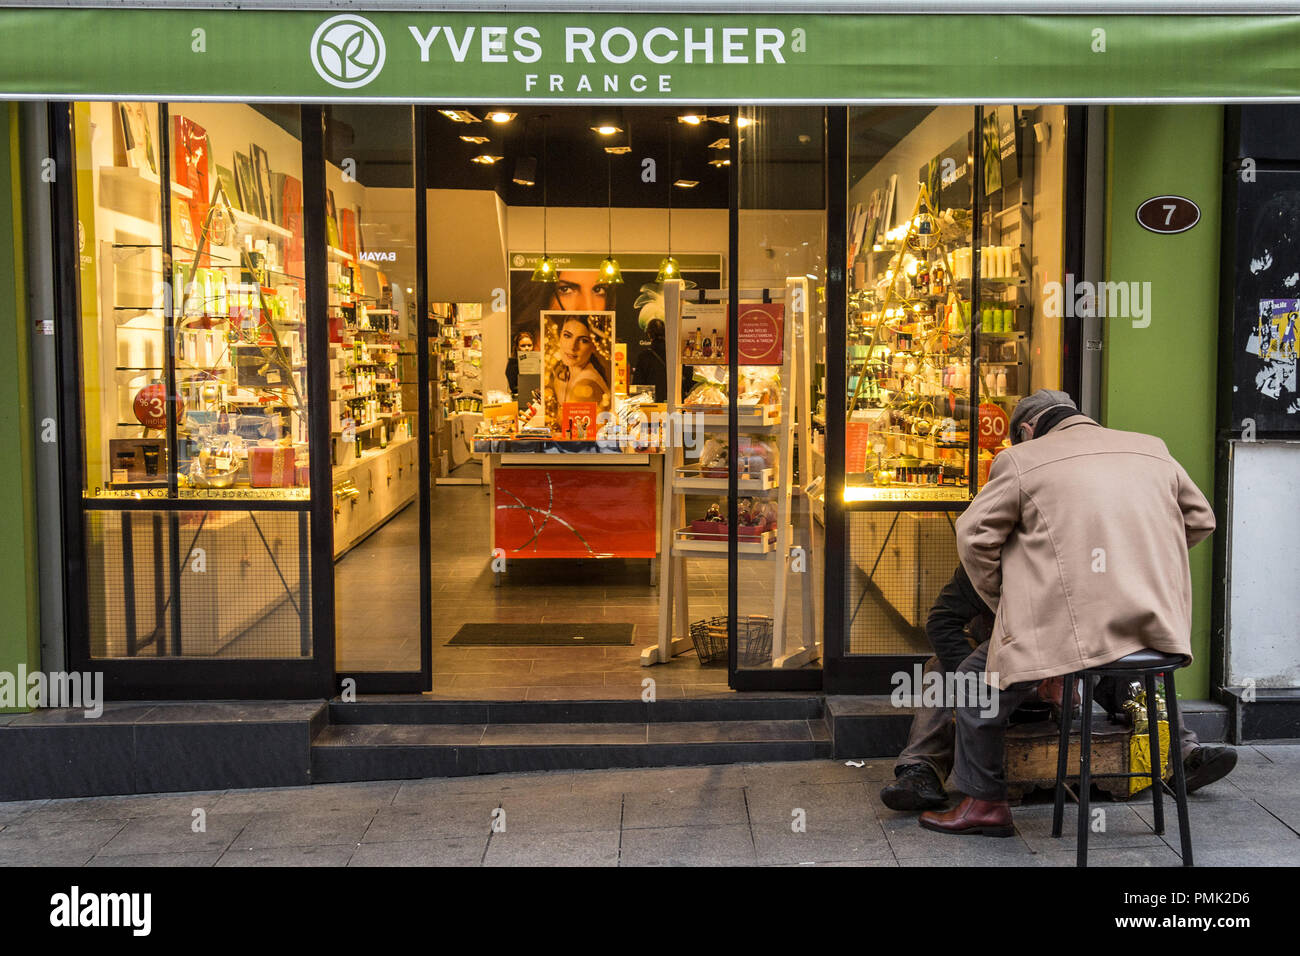 ISTANBUL, TURKEY - DECEMBER 29, 2015: Shoeshiner polishing shoes in front of the local Yves Rocher store with its sign. Yves Rocher is a French cosmet Stock Photo